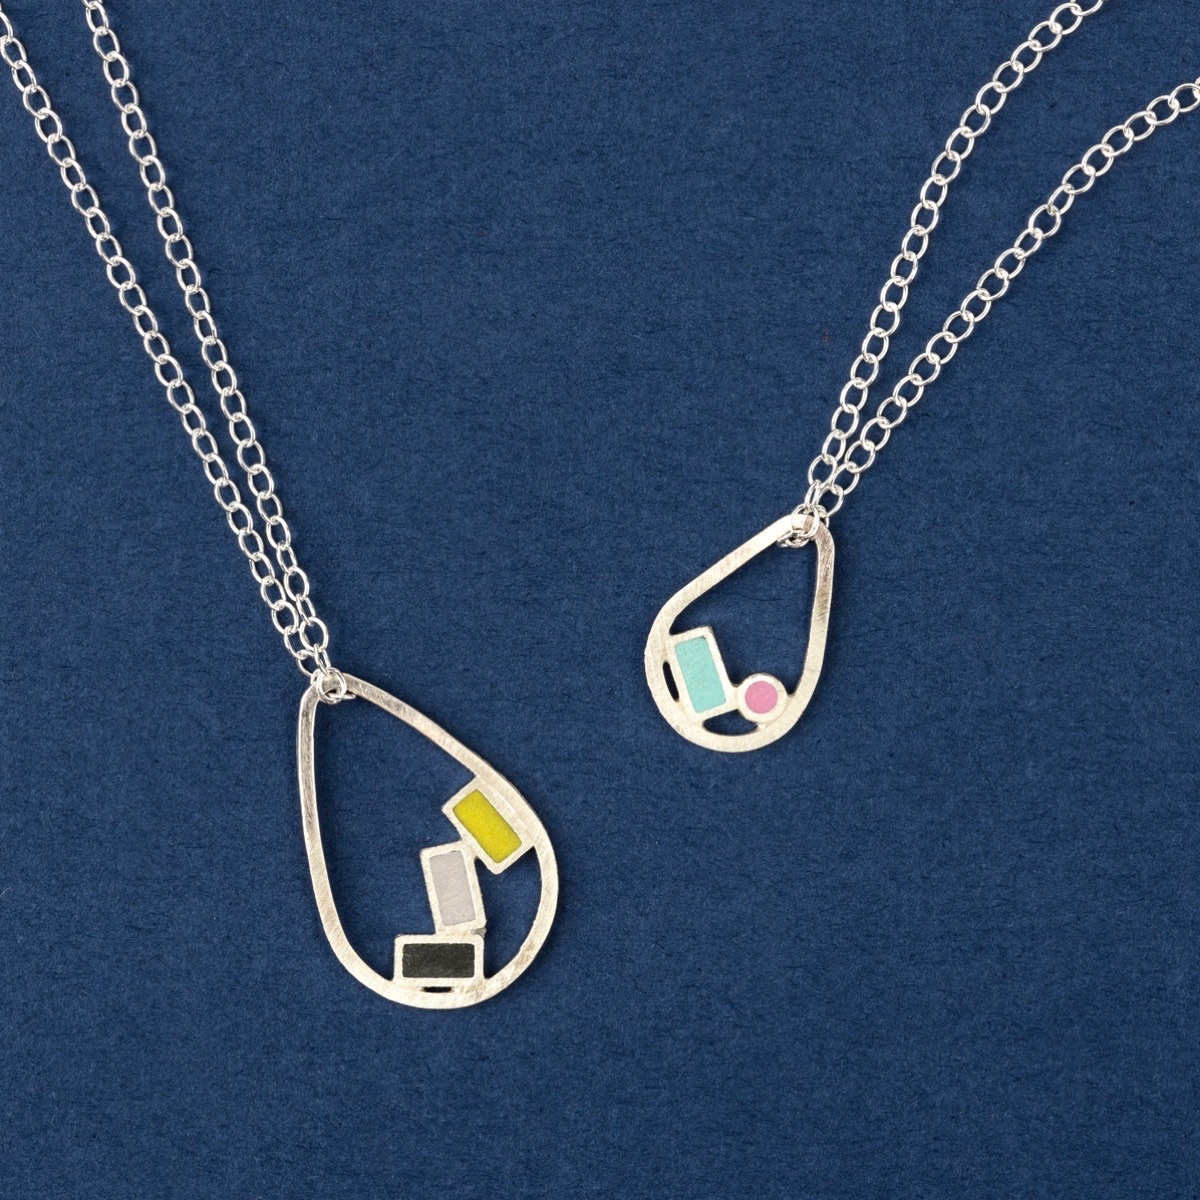 Contemporary Handmade silver and resin teardrop pendants by Colour Designs Jewellery